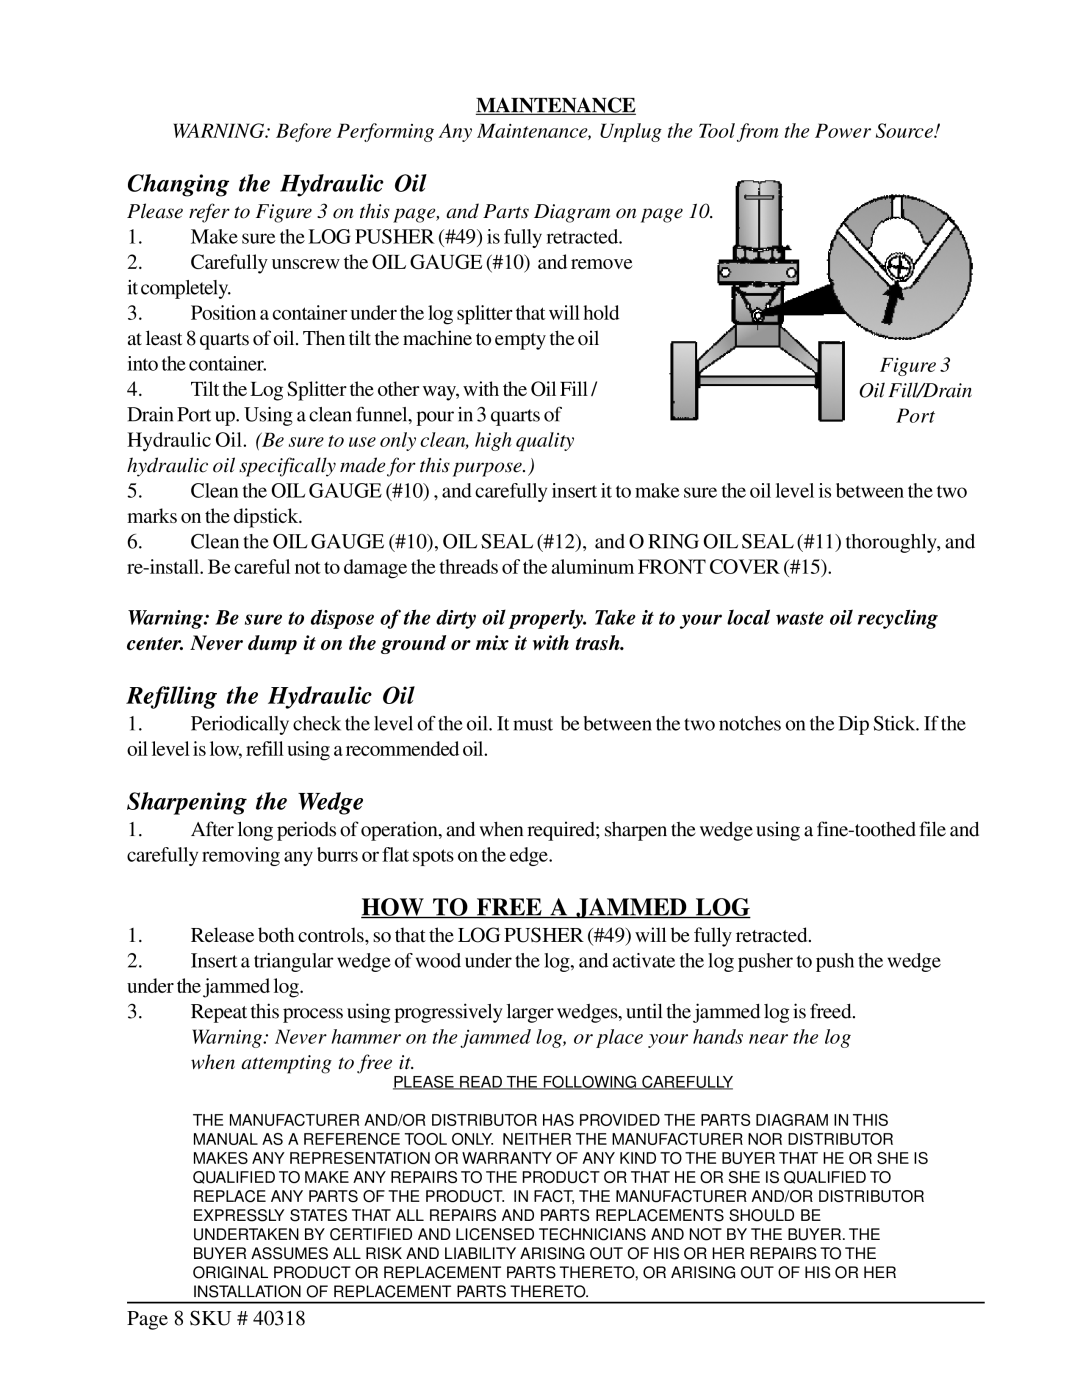 Harbor Freight Tools 40318 How To Free A Jammed Log, Maintenance, Please refer to on this page, and Parts Diagram on page 